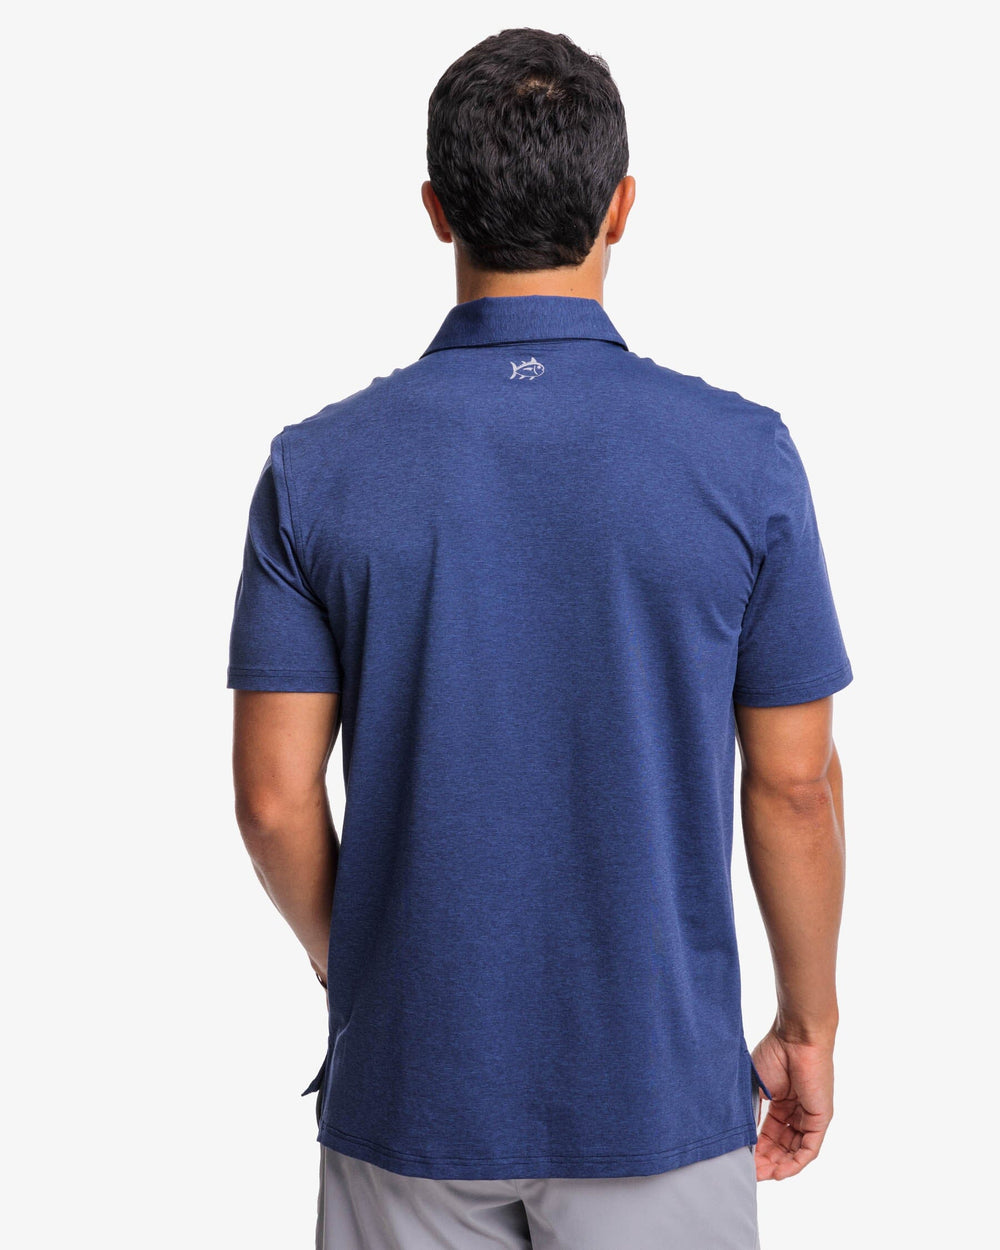 The back view of the brrr°®-eeze Heather Performance Polo Shirt by Southern Tide - Heather Nautical Navy